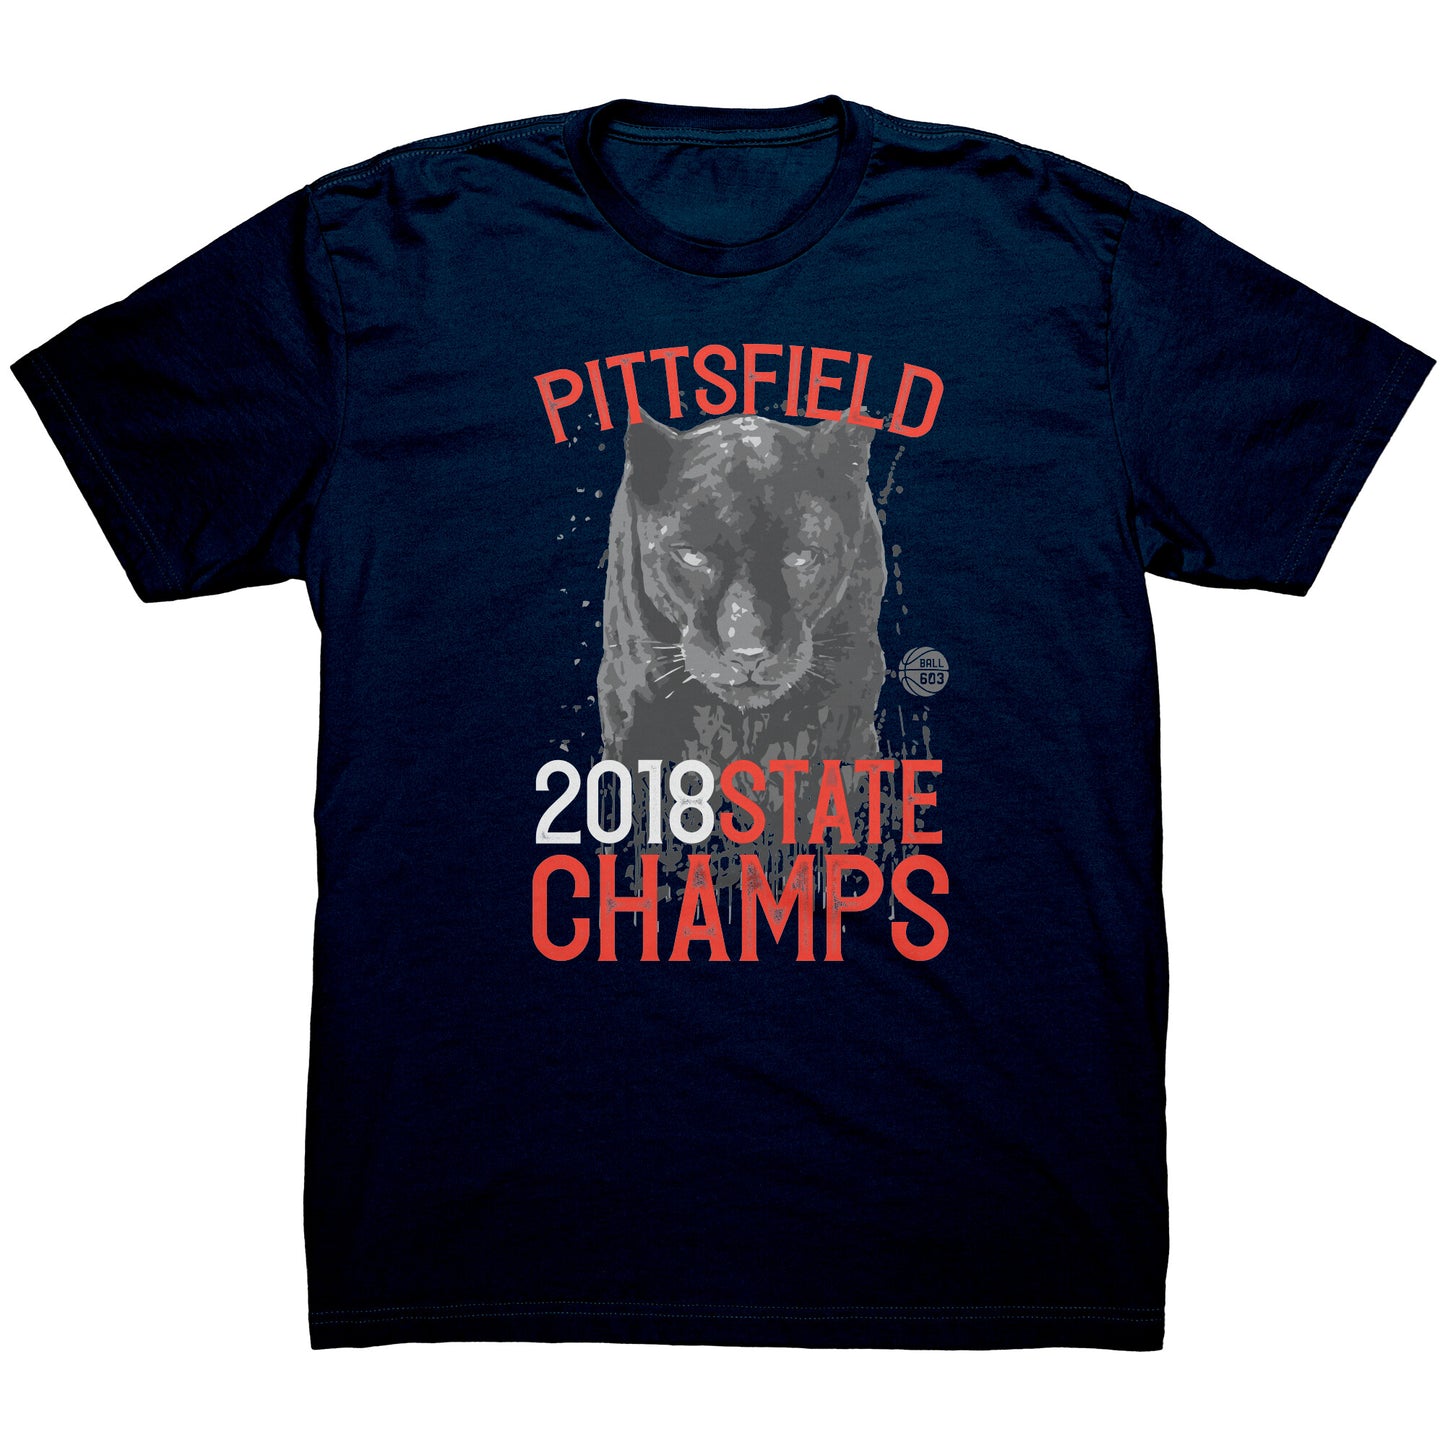 Pittsfield State Champs (Men's Cut)